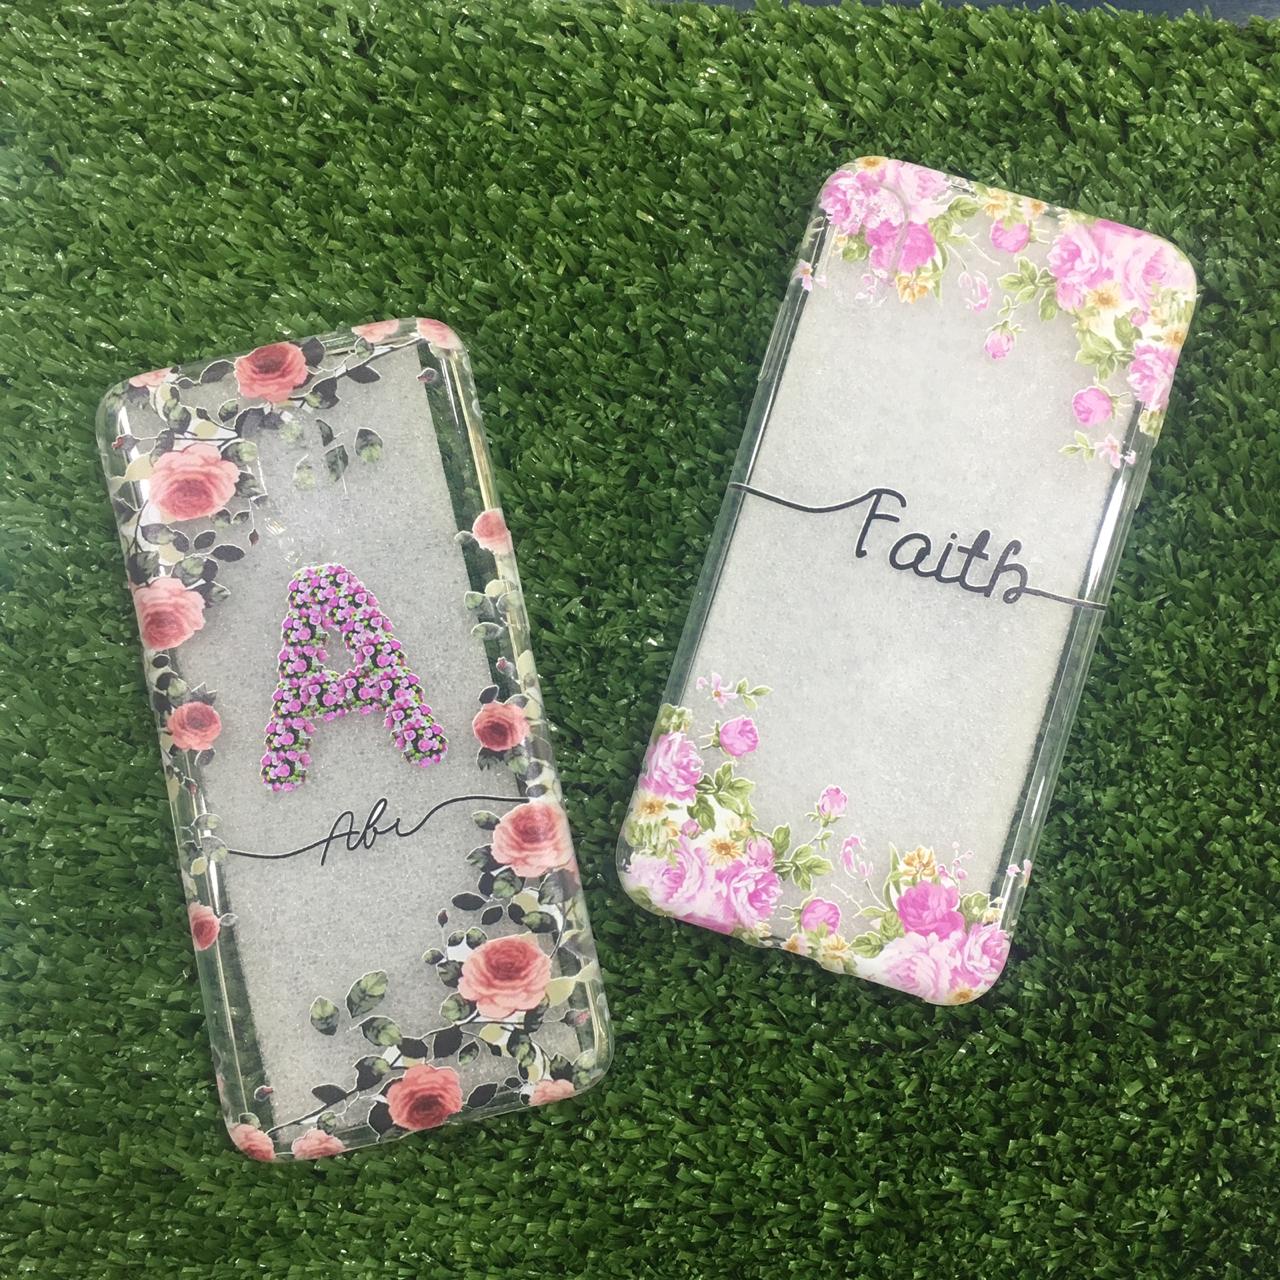 Soft Cases